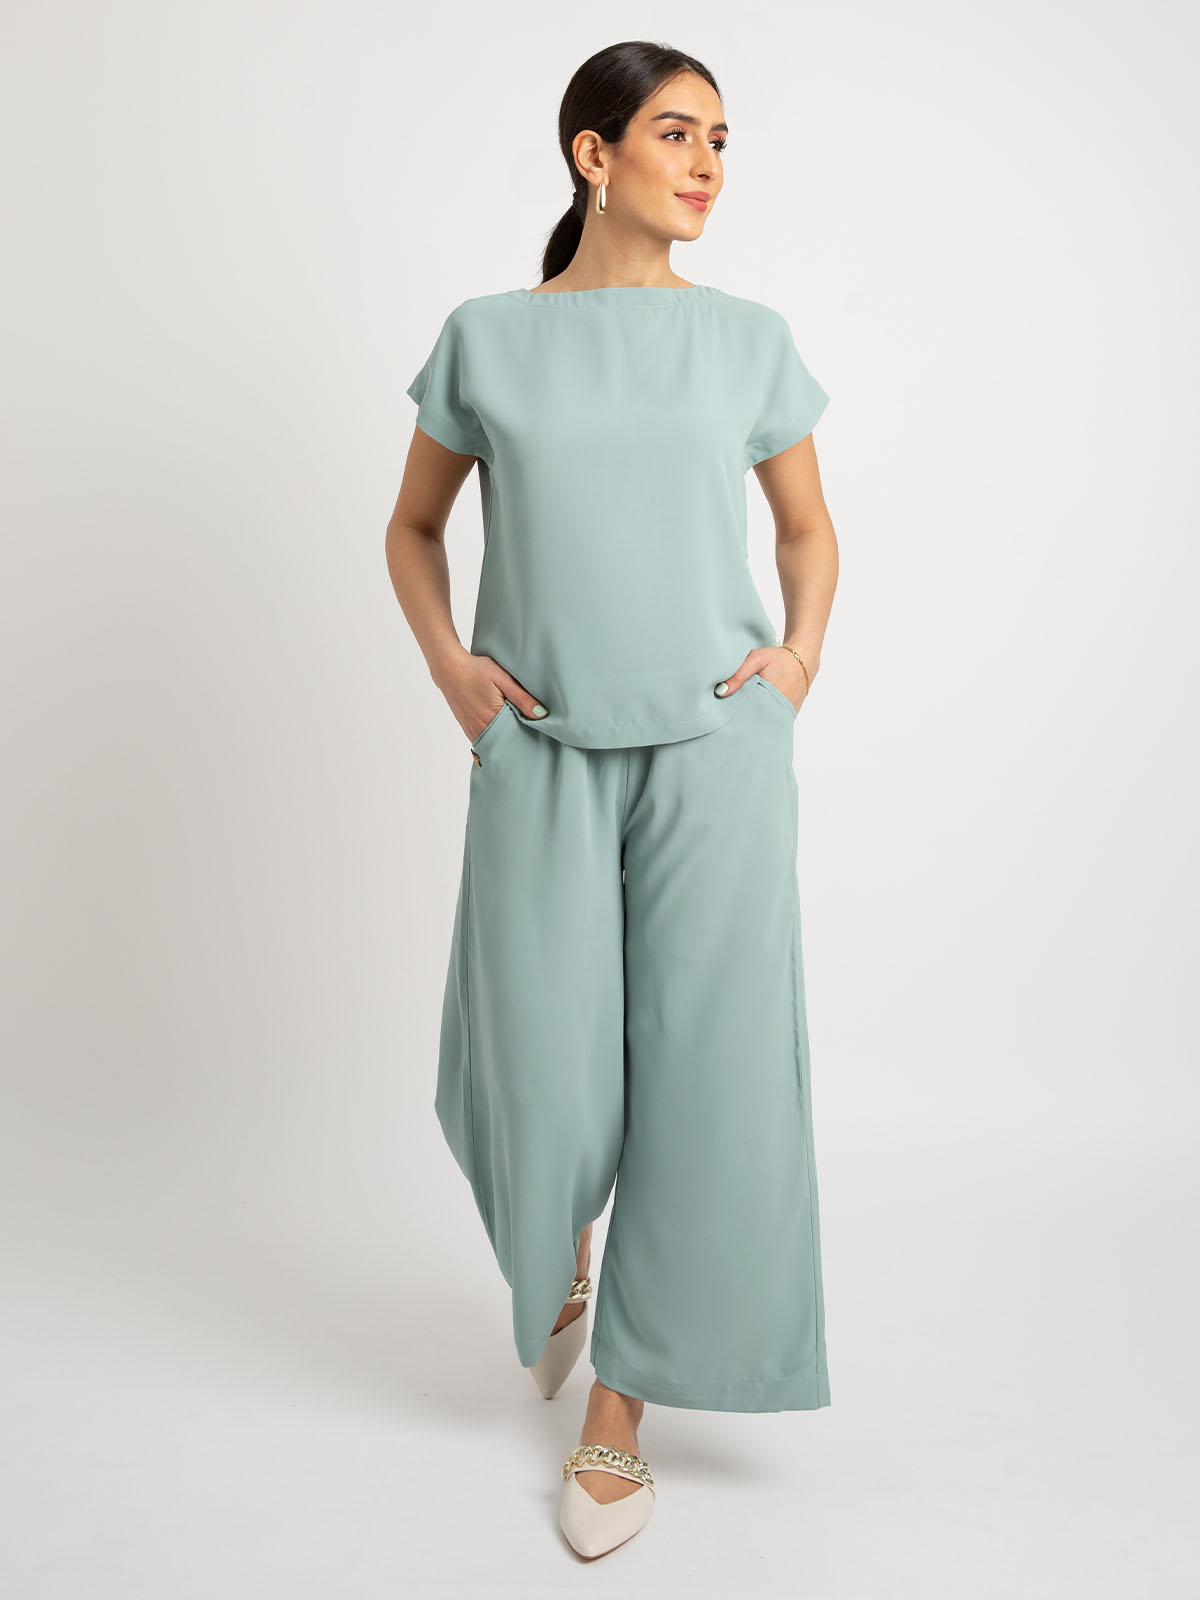 Kaafmeem women clothing tiffany trouser and top under the abaya matching set in soft fabric coords for everyday wear